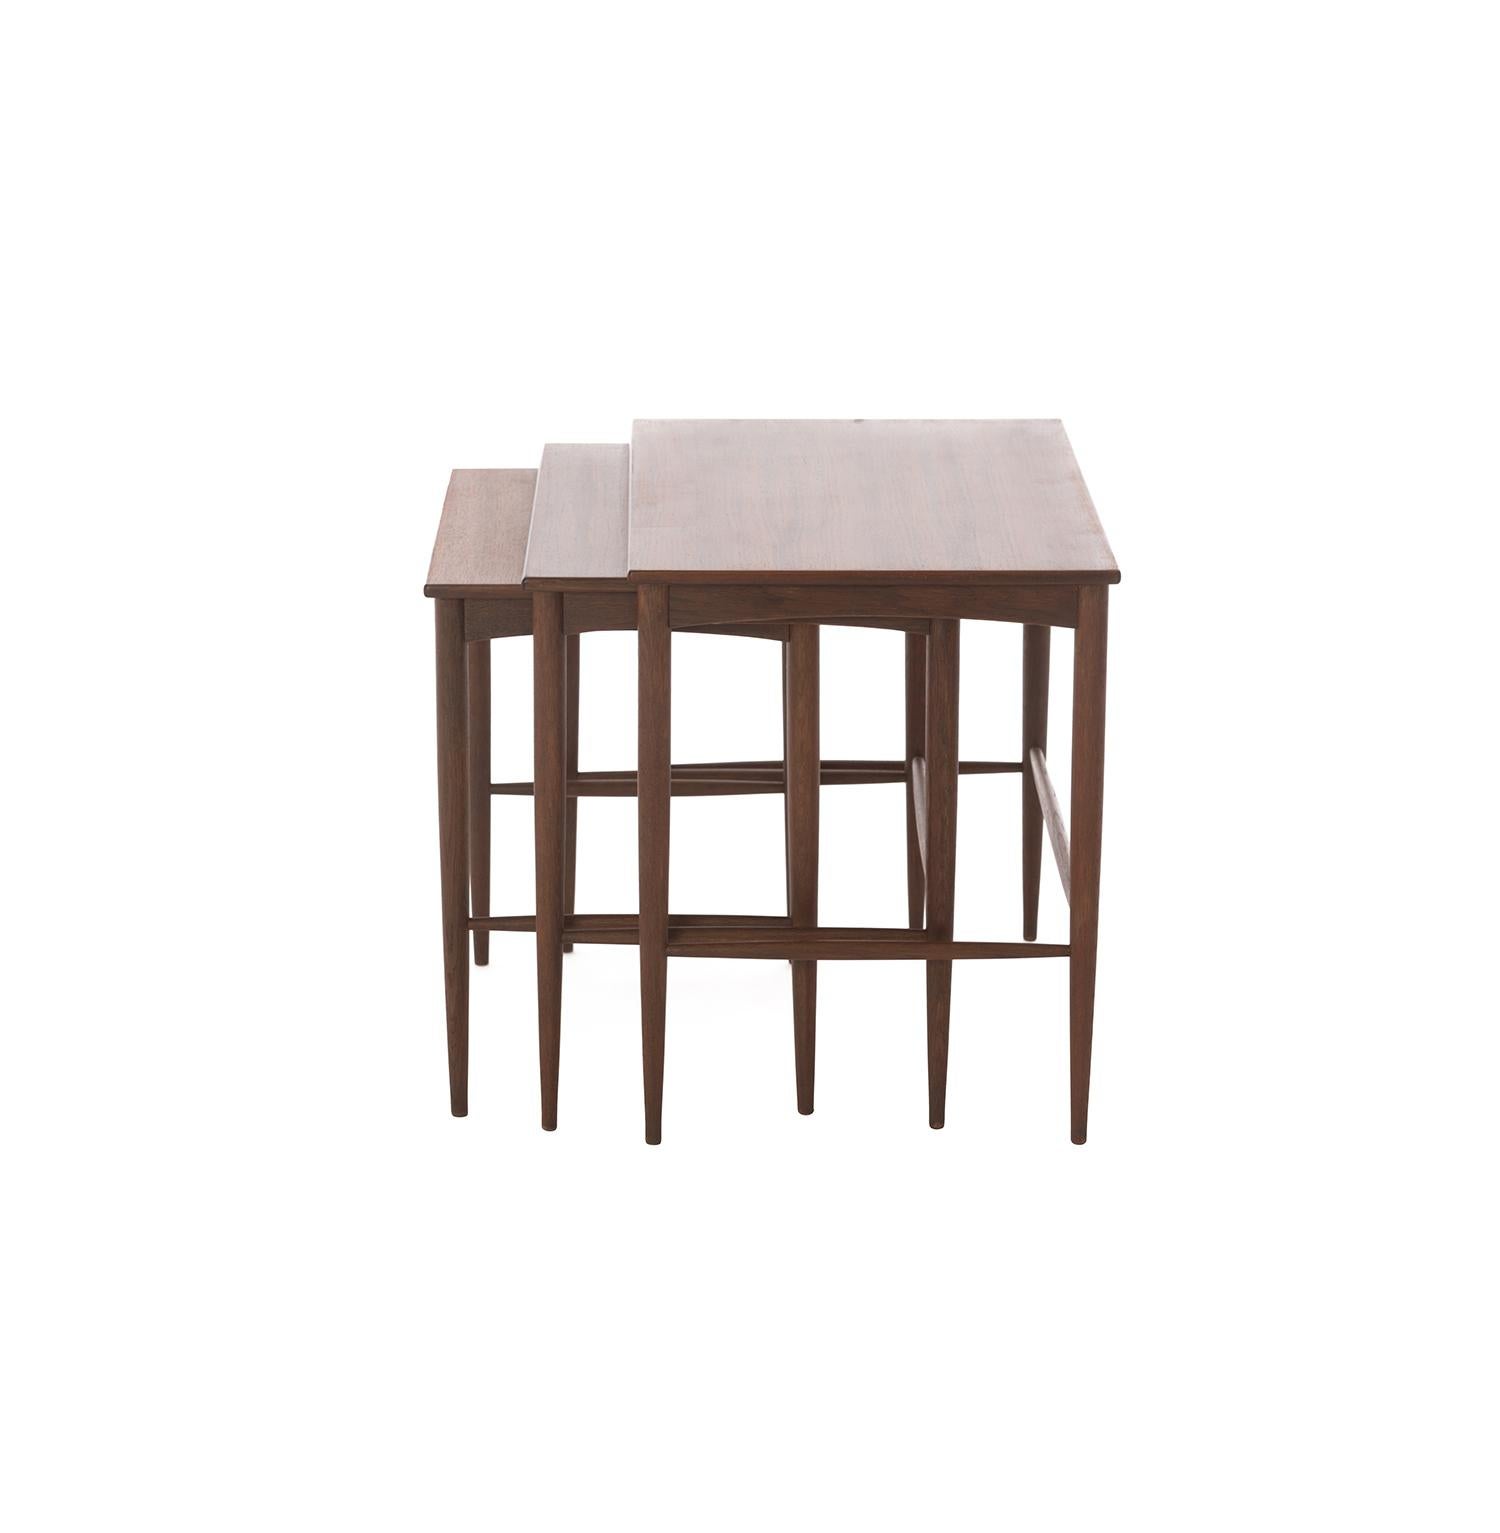 Scandinavian Modern Teak Nesting Table Set In Excellent Condition For Sale In Minneapolis, MN